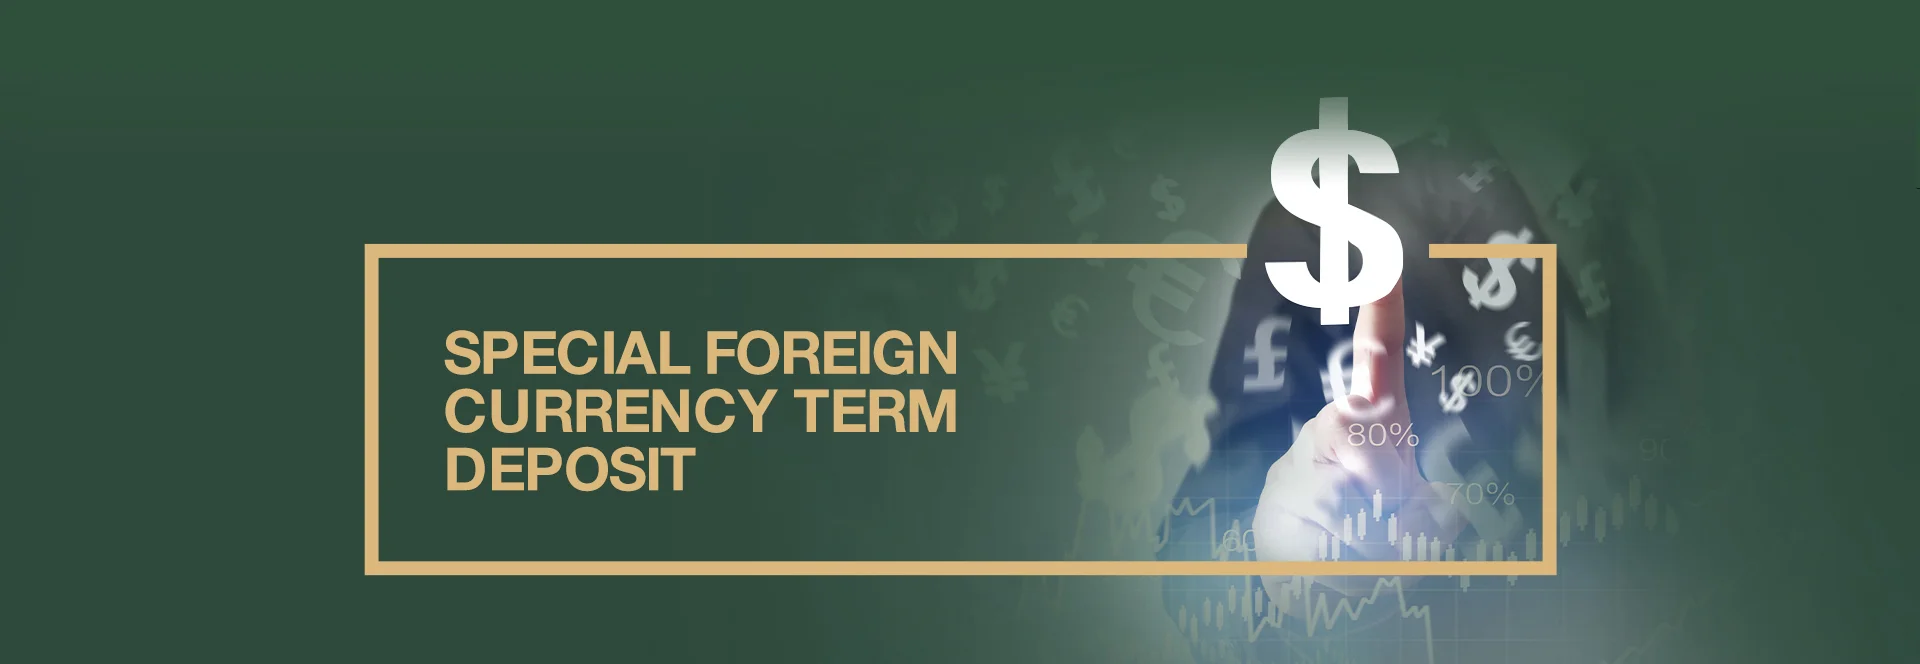 Special Foreign Currency Term Deposit